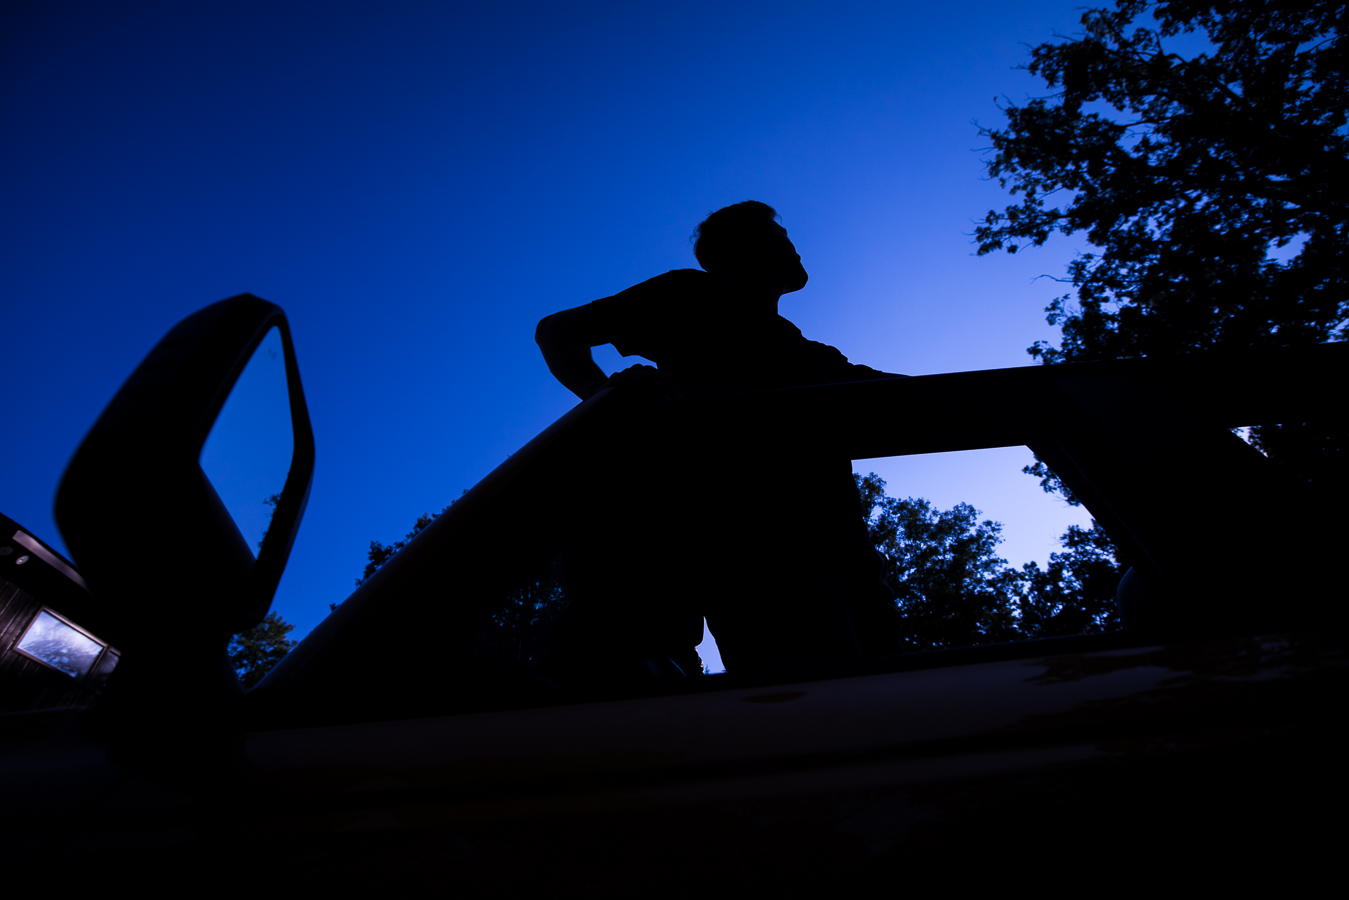 vibrant blue and purple image of this senior as he looks up into the sky while standing in his jeep during sunset captured bylisa rhinehart photographer